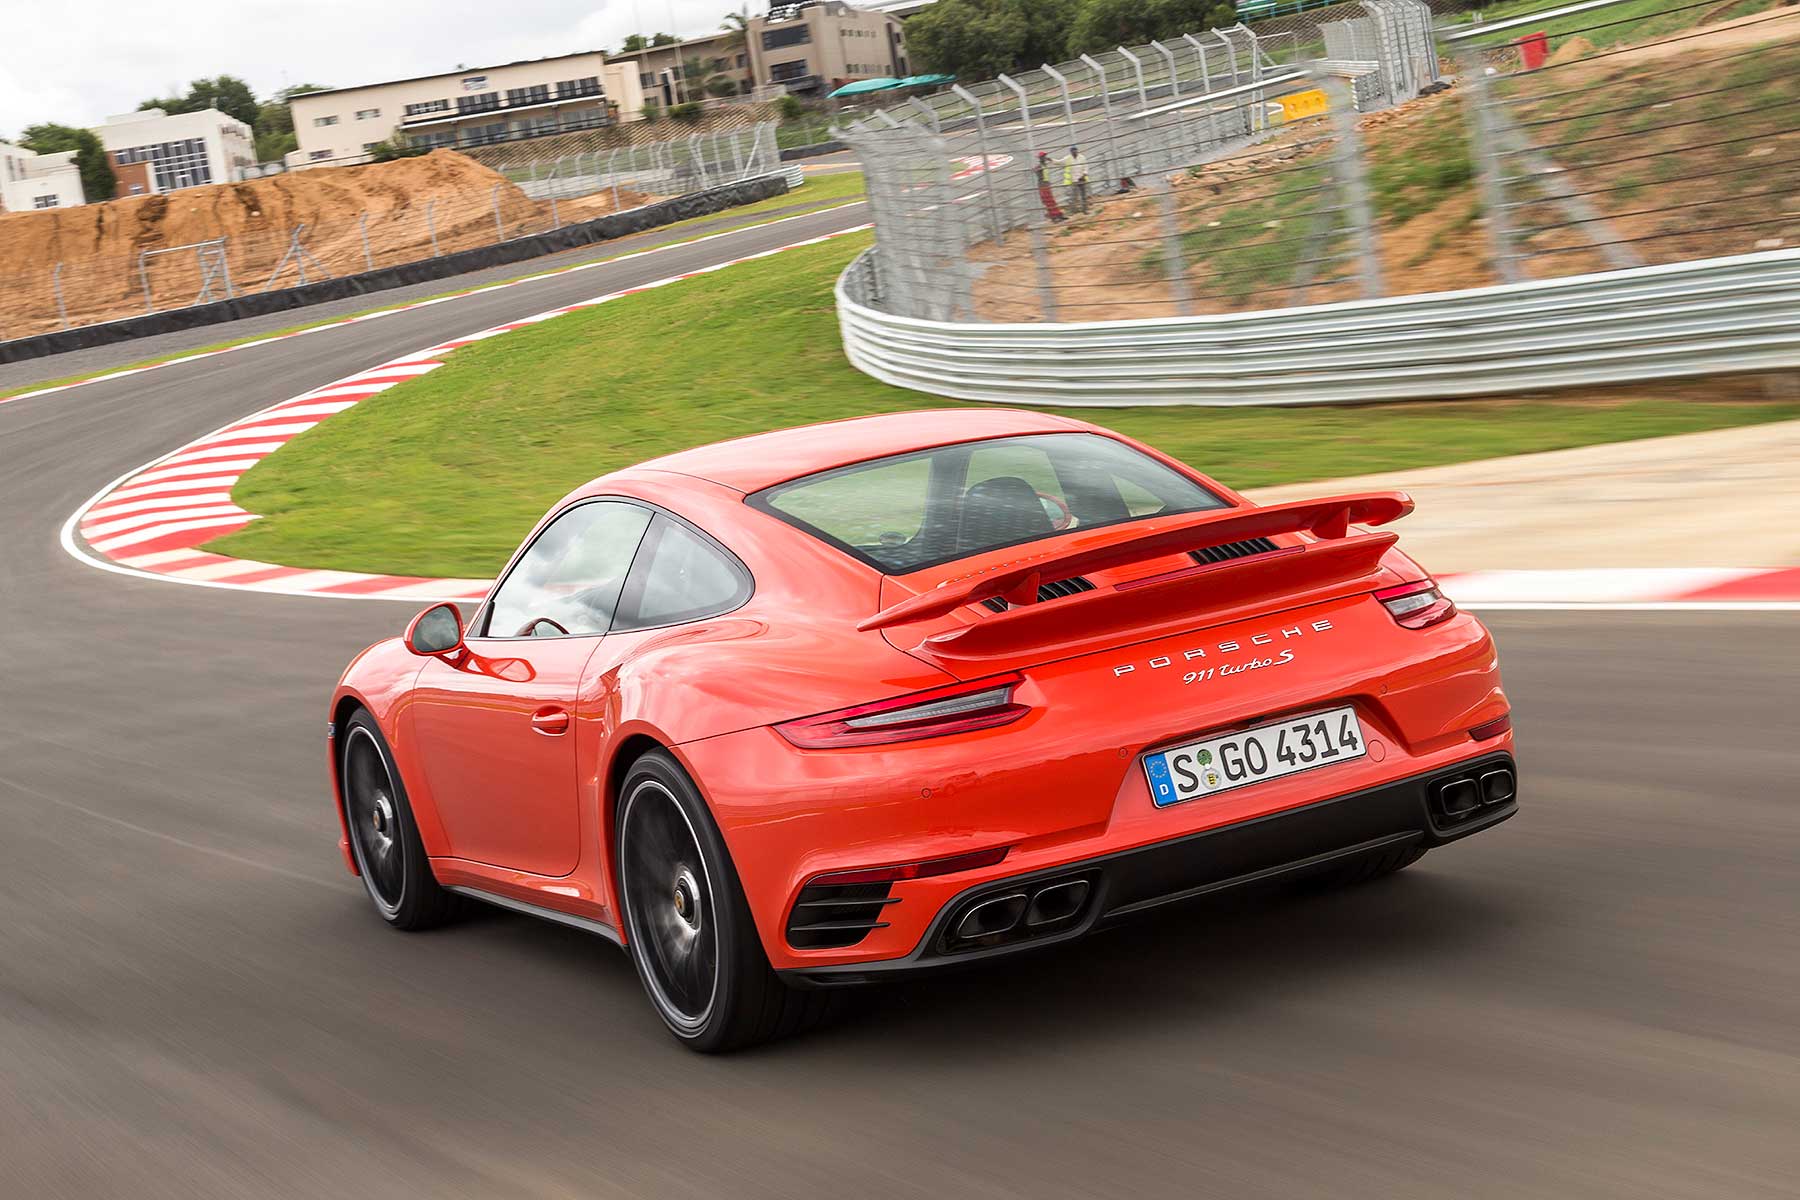 2016 Porsche 911 Turbo S review: first drive - Motoring Research